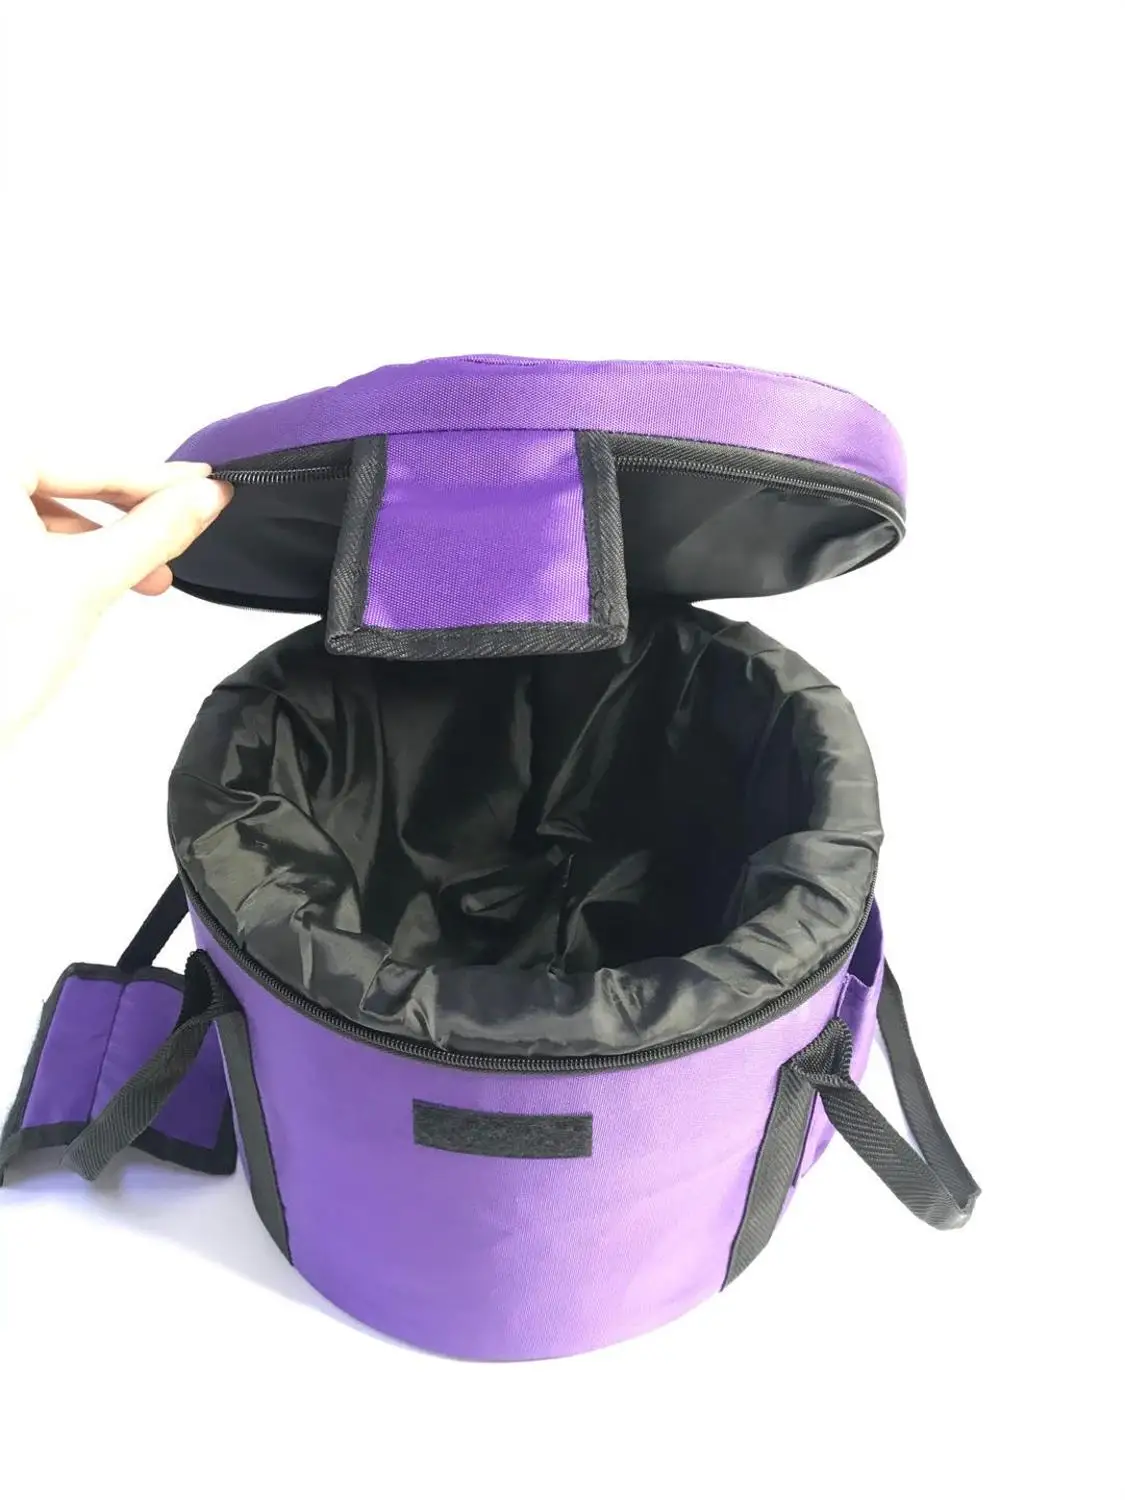 Free Carry Bag with 12